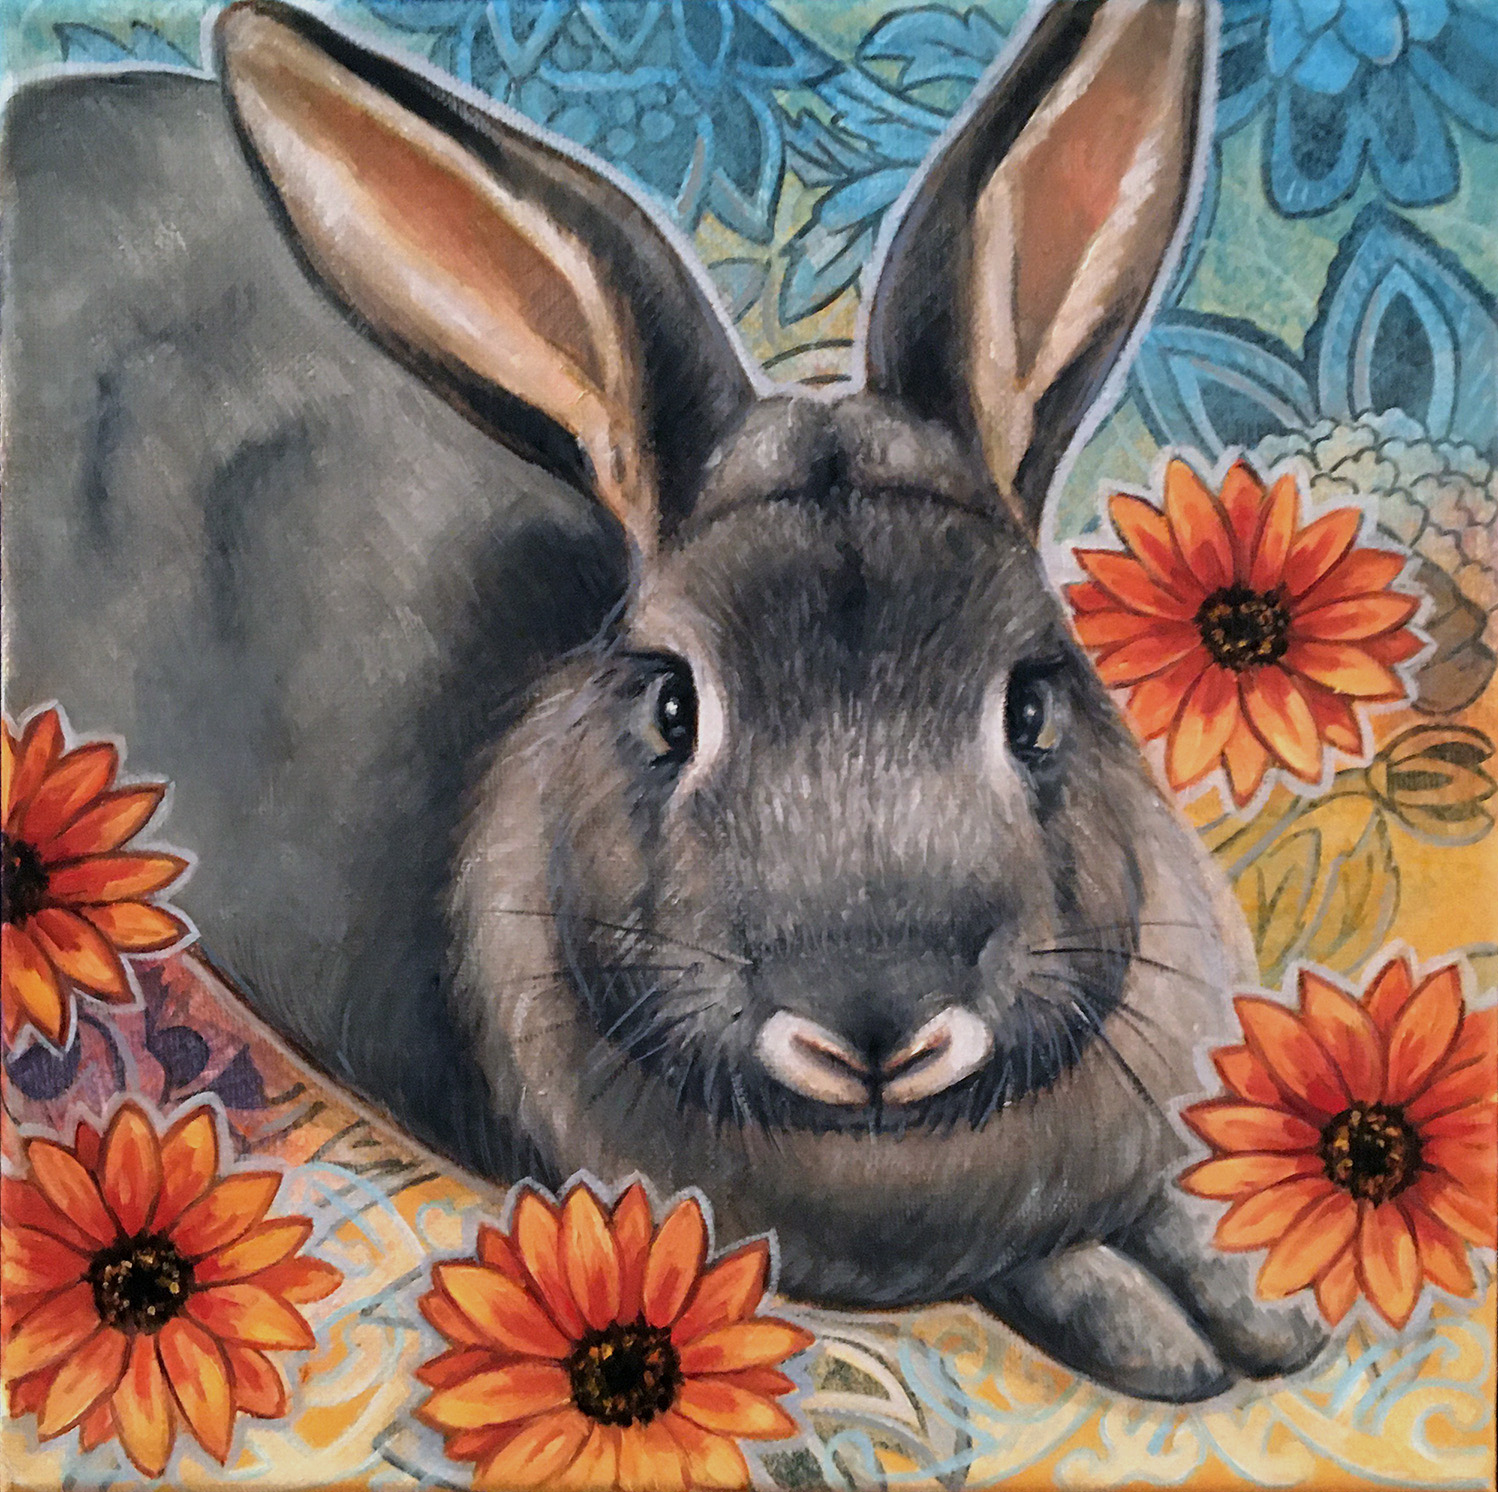 Painting of a pet rabbit named Chomper.